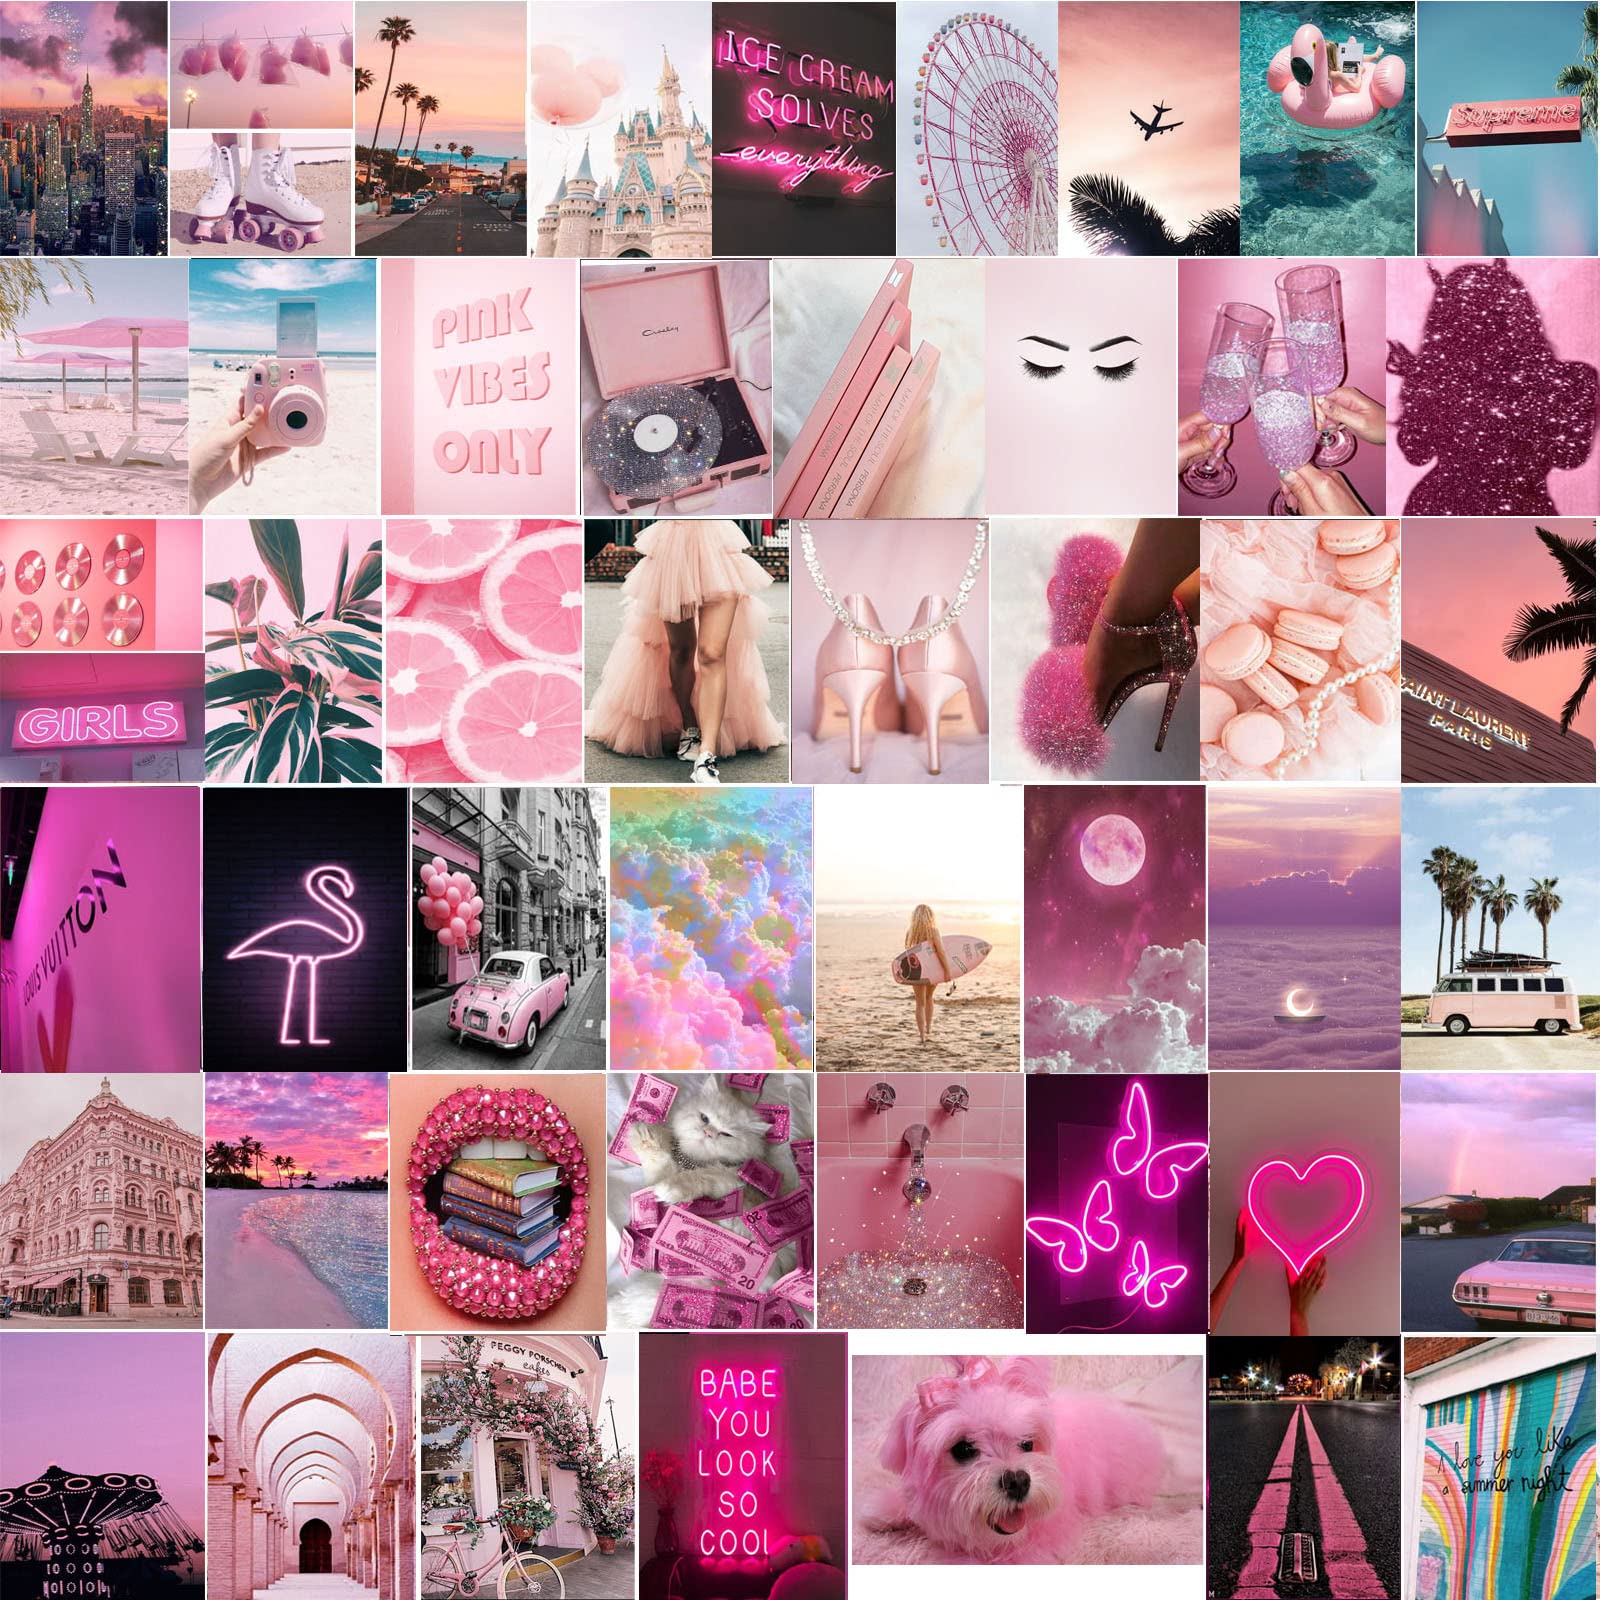 Michgar Pink Aesthetic wall collage kit of 50 aesthetic picture for Wall Collage /pink posters wall photo pink room decor asthetic wall image 4x6 (Set of 50)